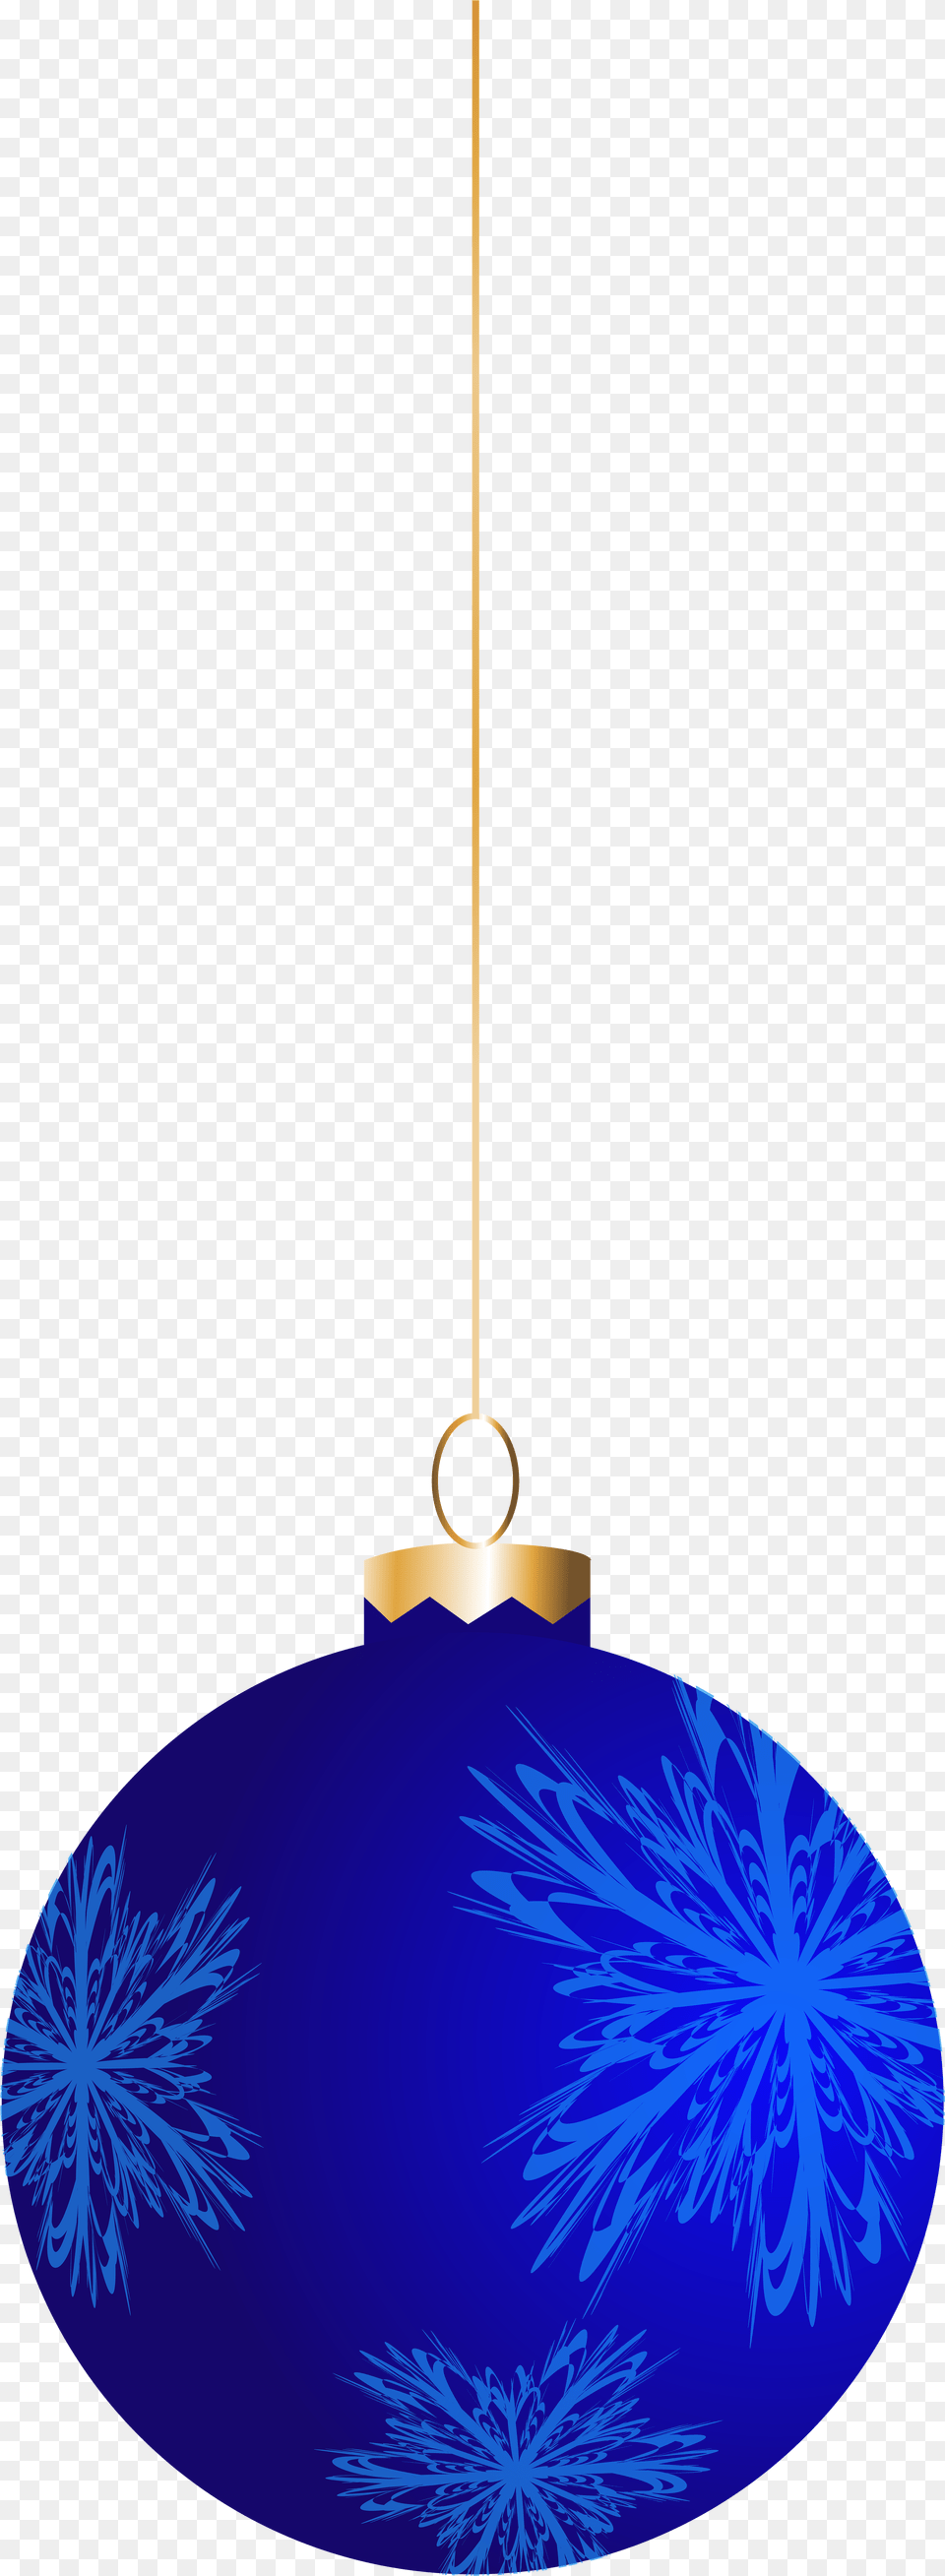 Blue Christmas Balls Christmas Ornament, Accessories, Lighting, Lamp Free Png Download